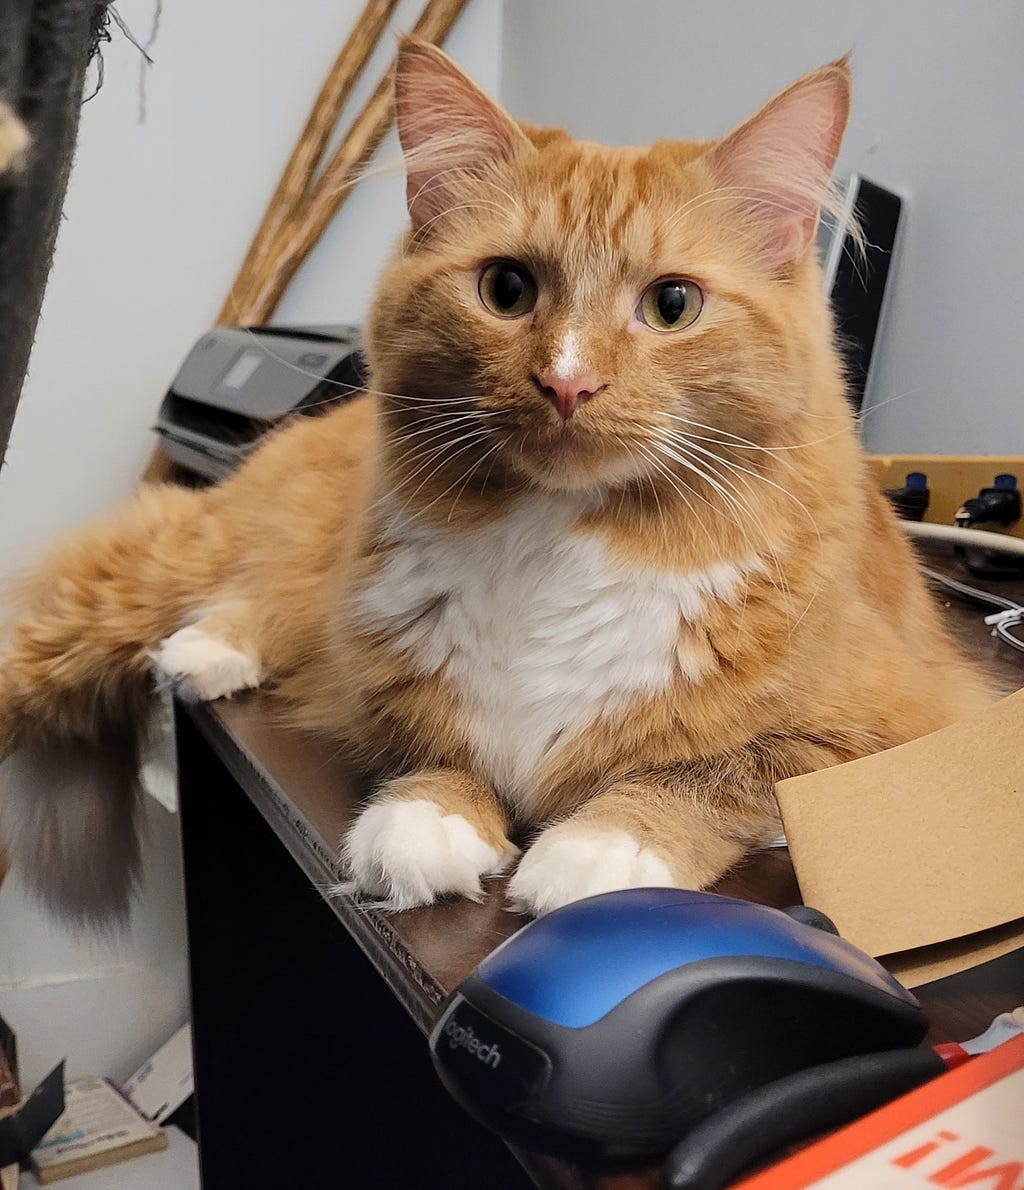 Orange tabby with white chest and paws next to a blue computer mouse.